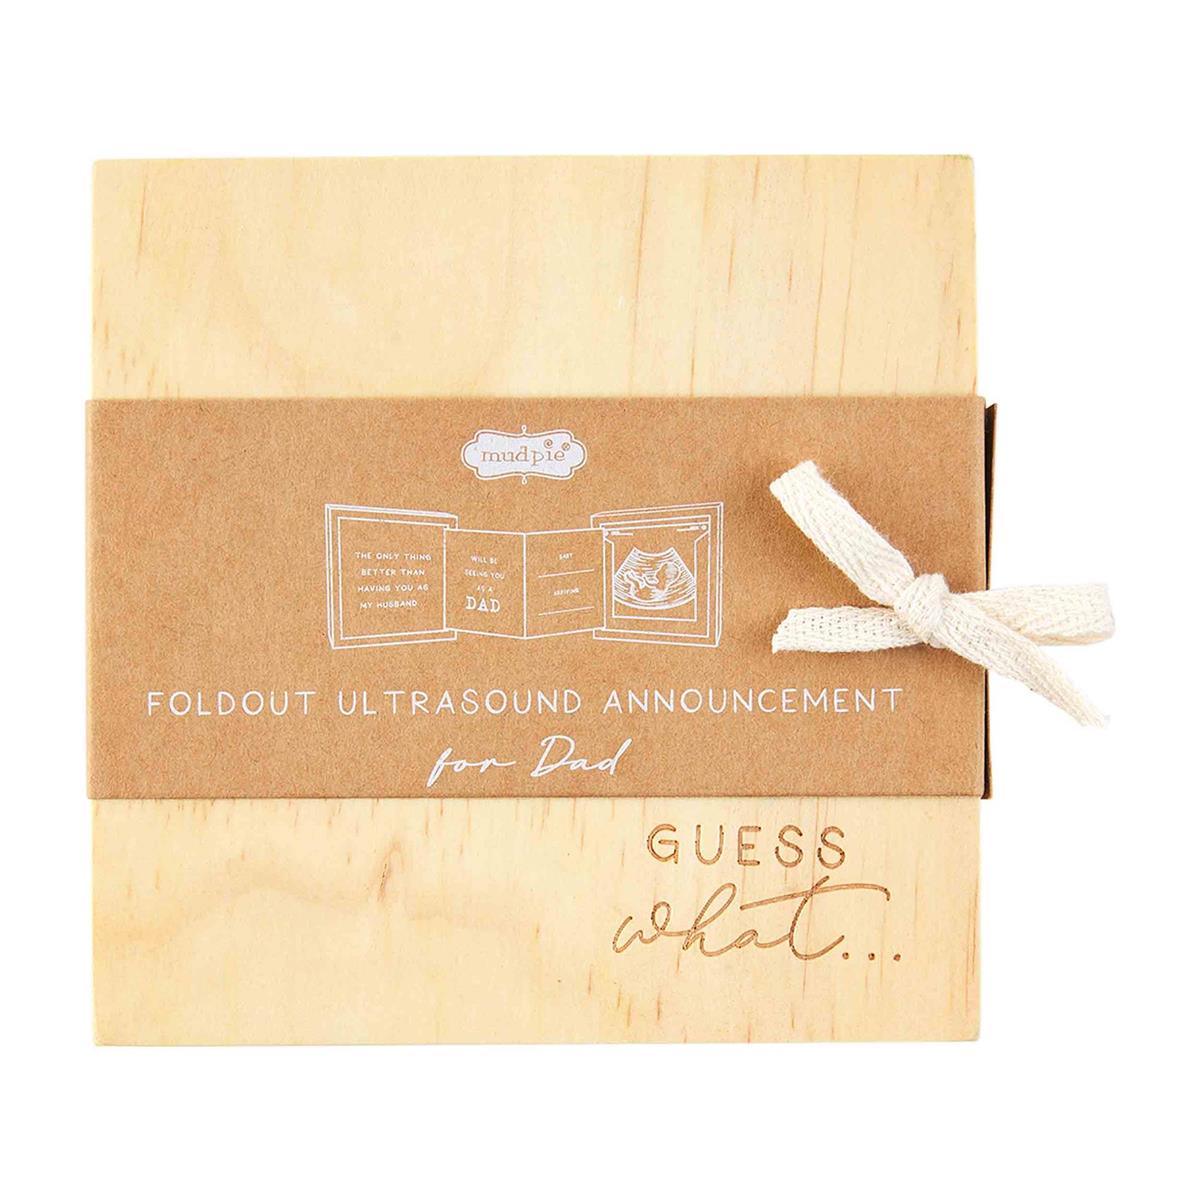 Mud Pie Fold Out Announcement Gift Box